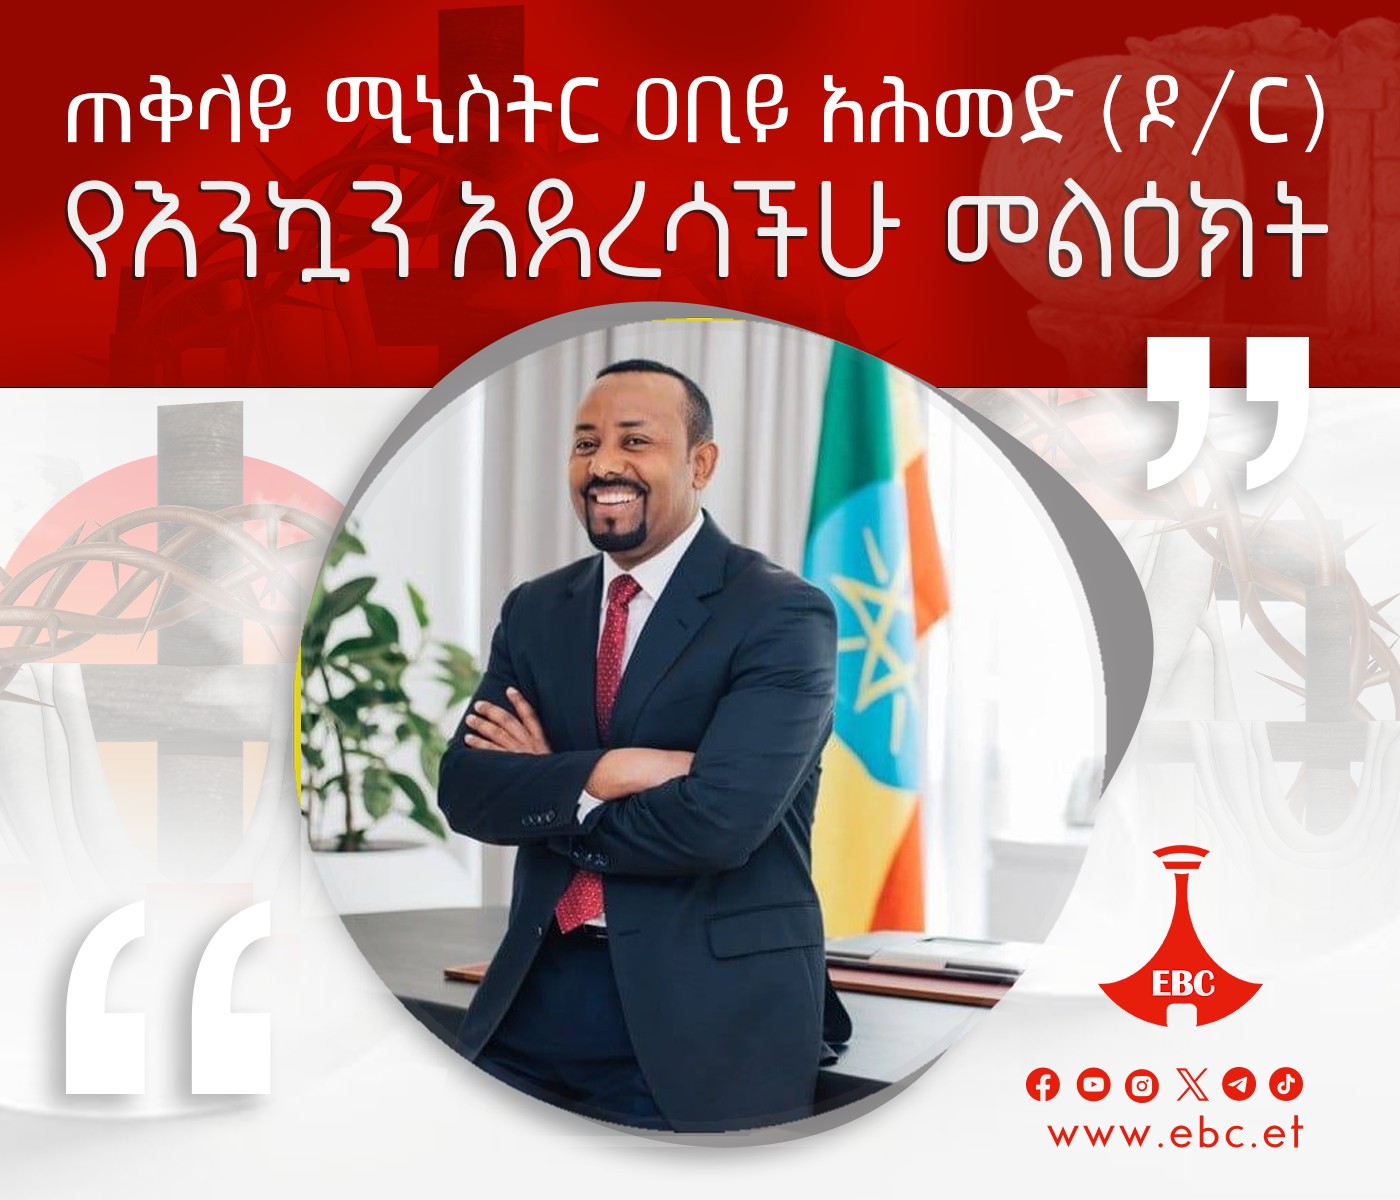 PM Abiy Wishes Ethiopians Happy Easter, says Ethiopian Resurrection Approaching